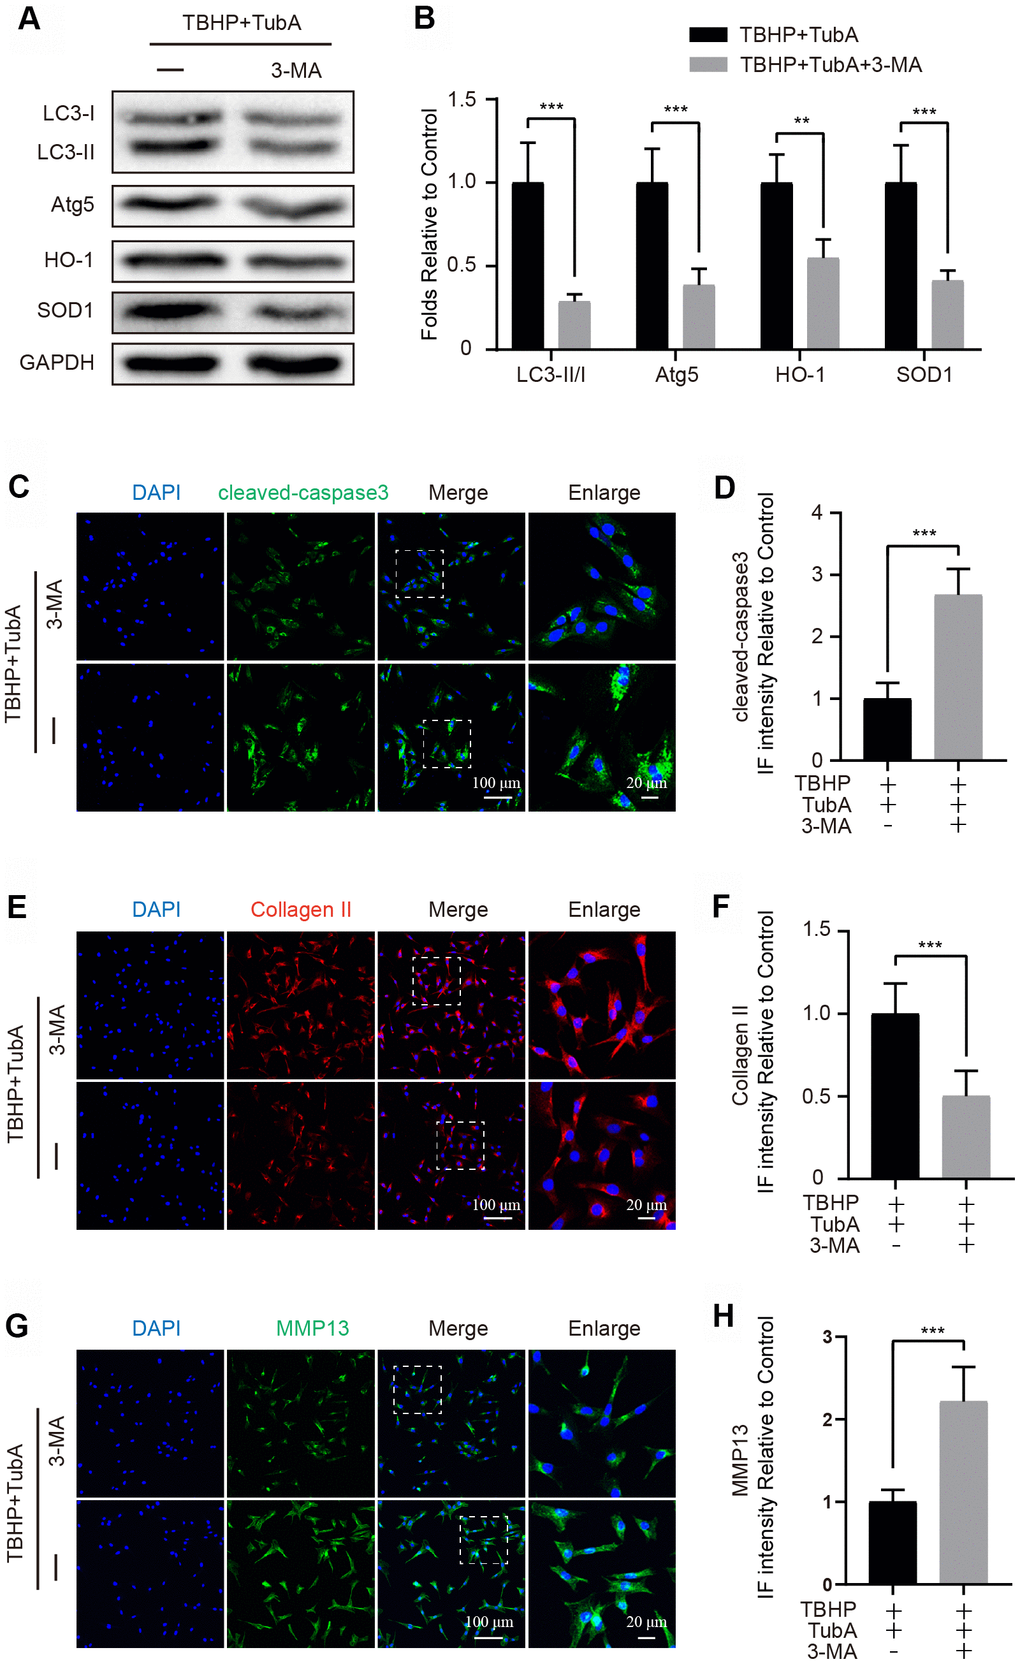 3-MA treatment reverses the effects of TubA on oxidative stress, apoptosis and ECM degradation. (A, B) Western blotting and quantification of LC3, Atg5, HO-1 and SOD1 in each group. Chondrocytes were treated with TBHP + TubA, or TBHP + TubA + 3-MA for 6 hours. (C, D) IF staining and quantification of cleaved caspase3 in each chondrocyte group as above, scale bar = 100 μm, scale bar (enlarged) = 20 μm. (E, F) IF staining and quantification of Collagen II in each chondrocyte group as above, scale bar = 100 μm, scale bar (enlarged) = 20 μm. (G, H) IF staining and quantification of MMP13 in each chondrocyte group as above, scale bar = 100 μm, scale bar (enlarged) = 20 μm. N = 5, GAPDH was the loading control, significance: *P